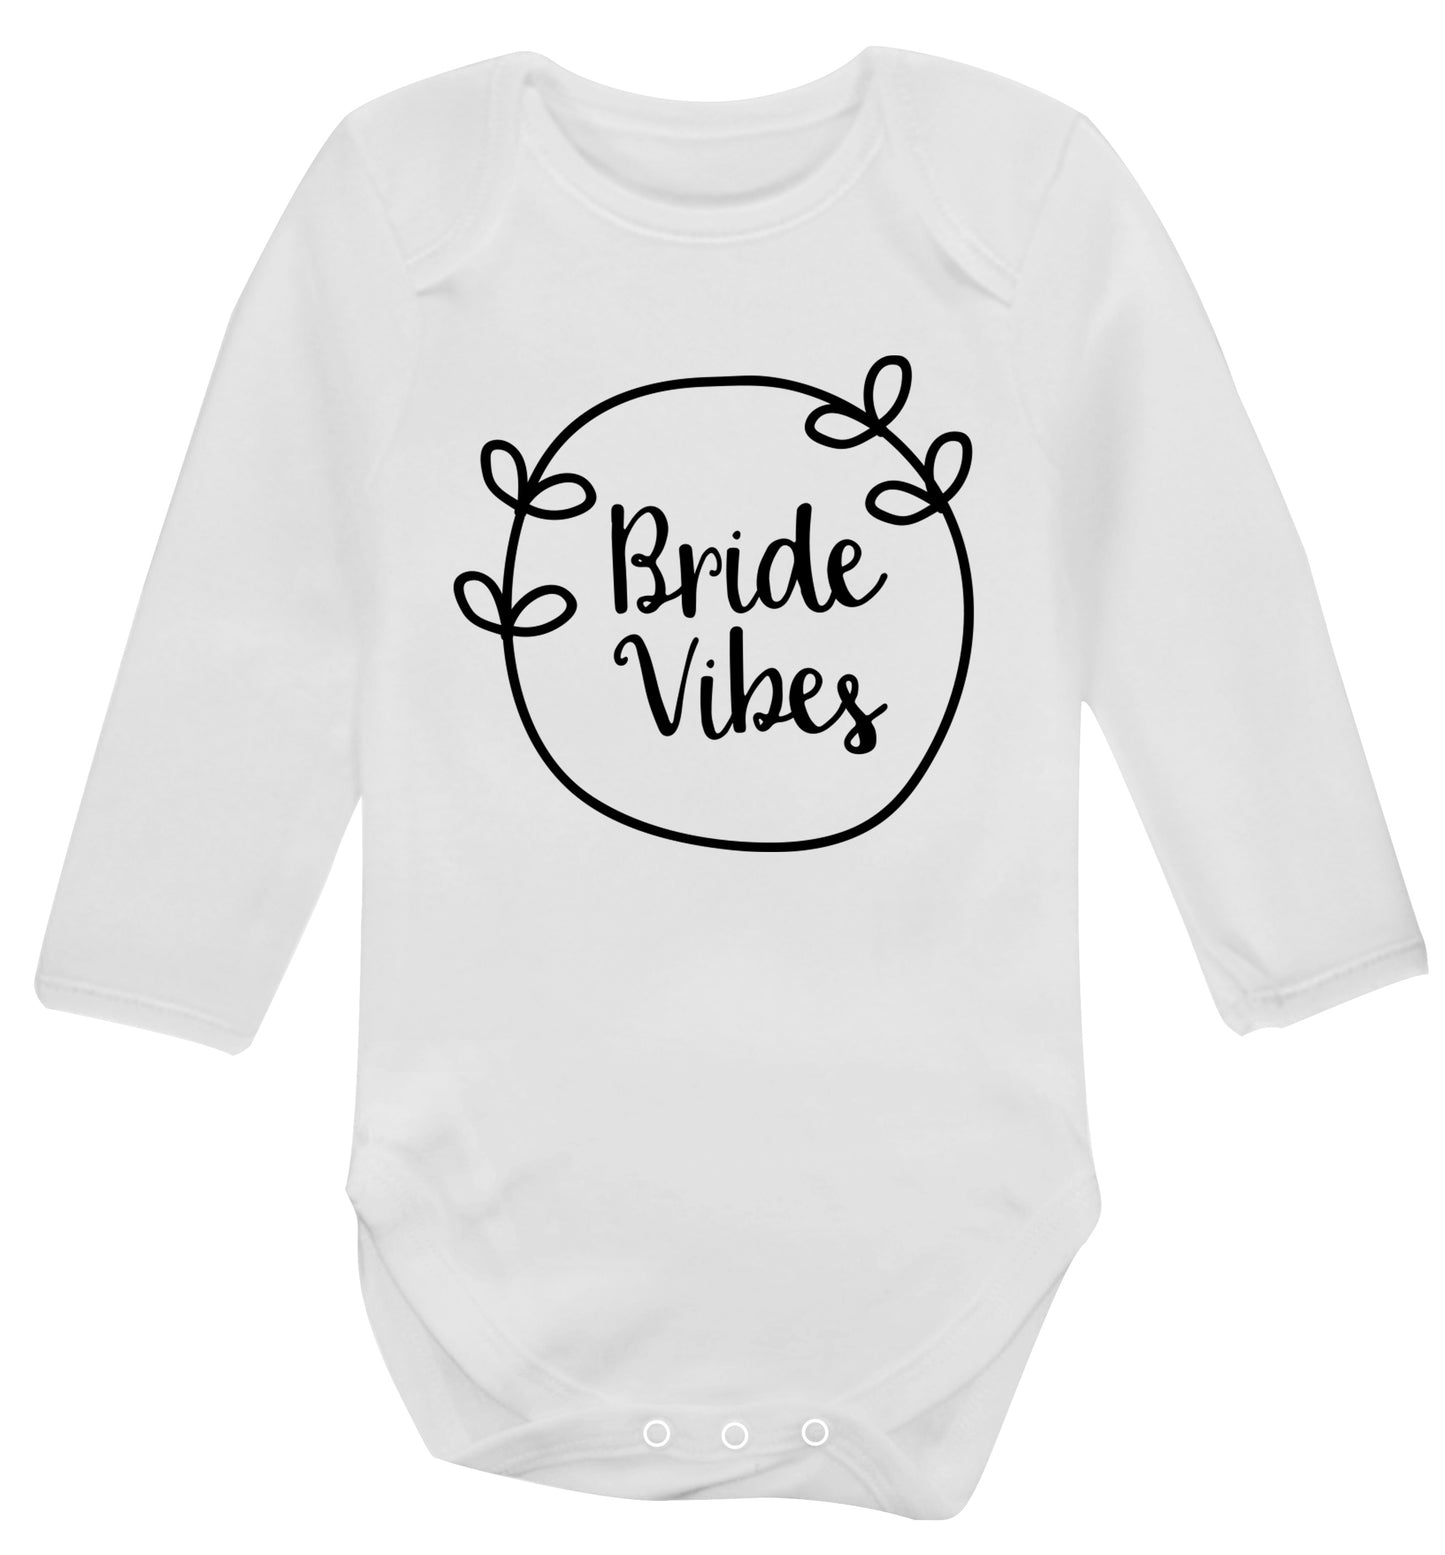 Bride Vibes Baby Vest long sleeved white 6-12 months